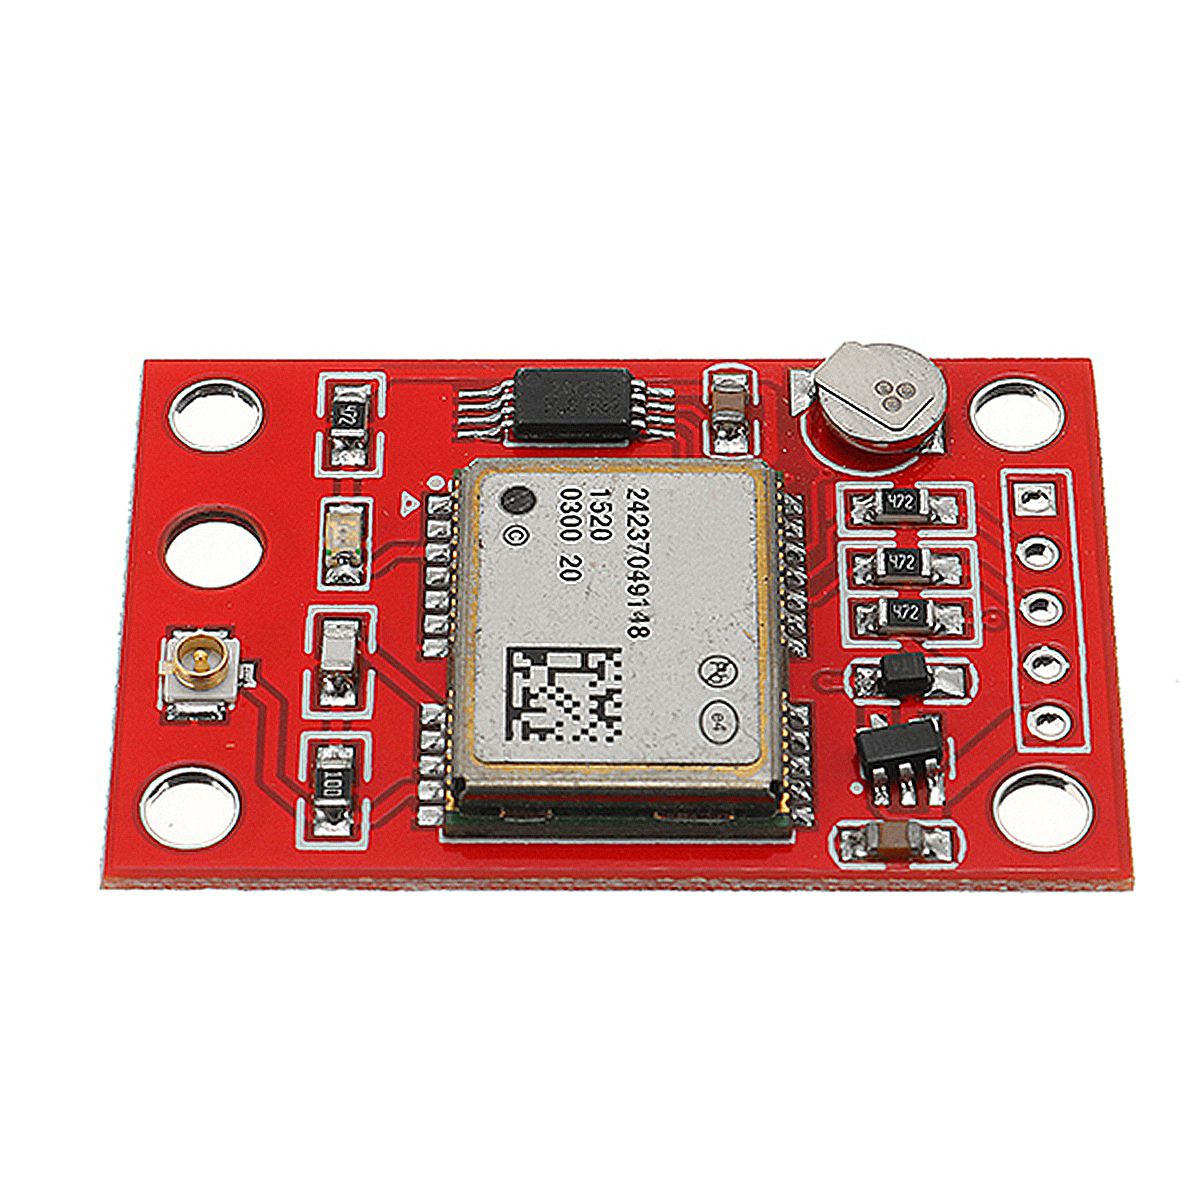 GY-GPS-Module-Board-9600-Baud-Rate-With-Antenna-1196661